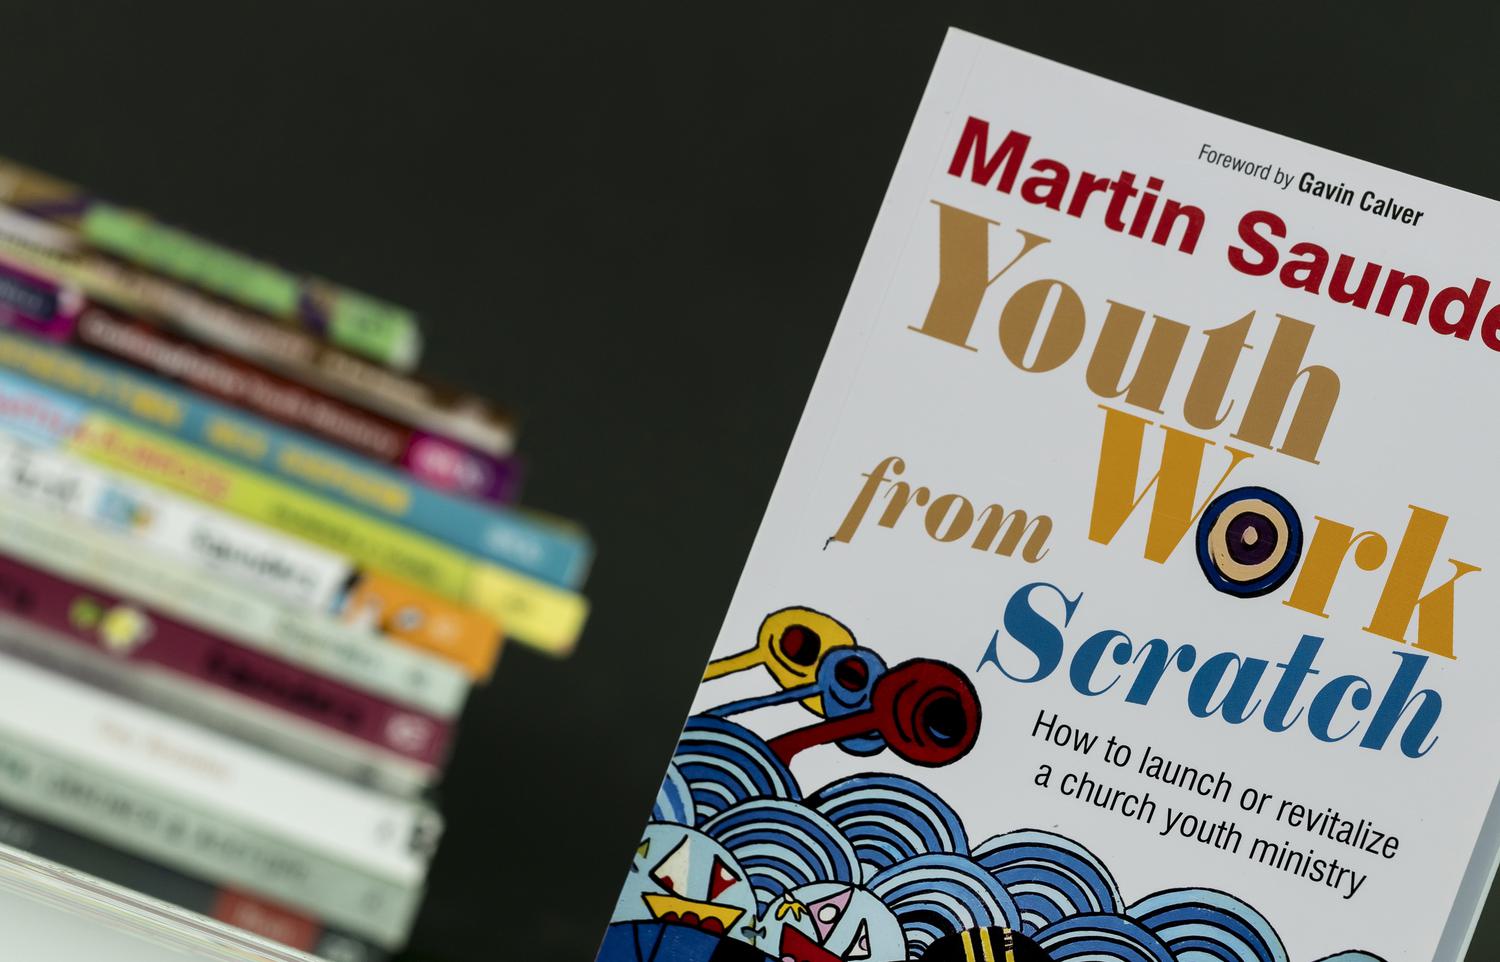 Youth Work from Scratch, by Martin Saunders